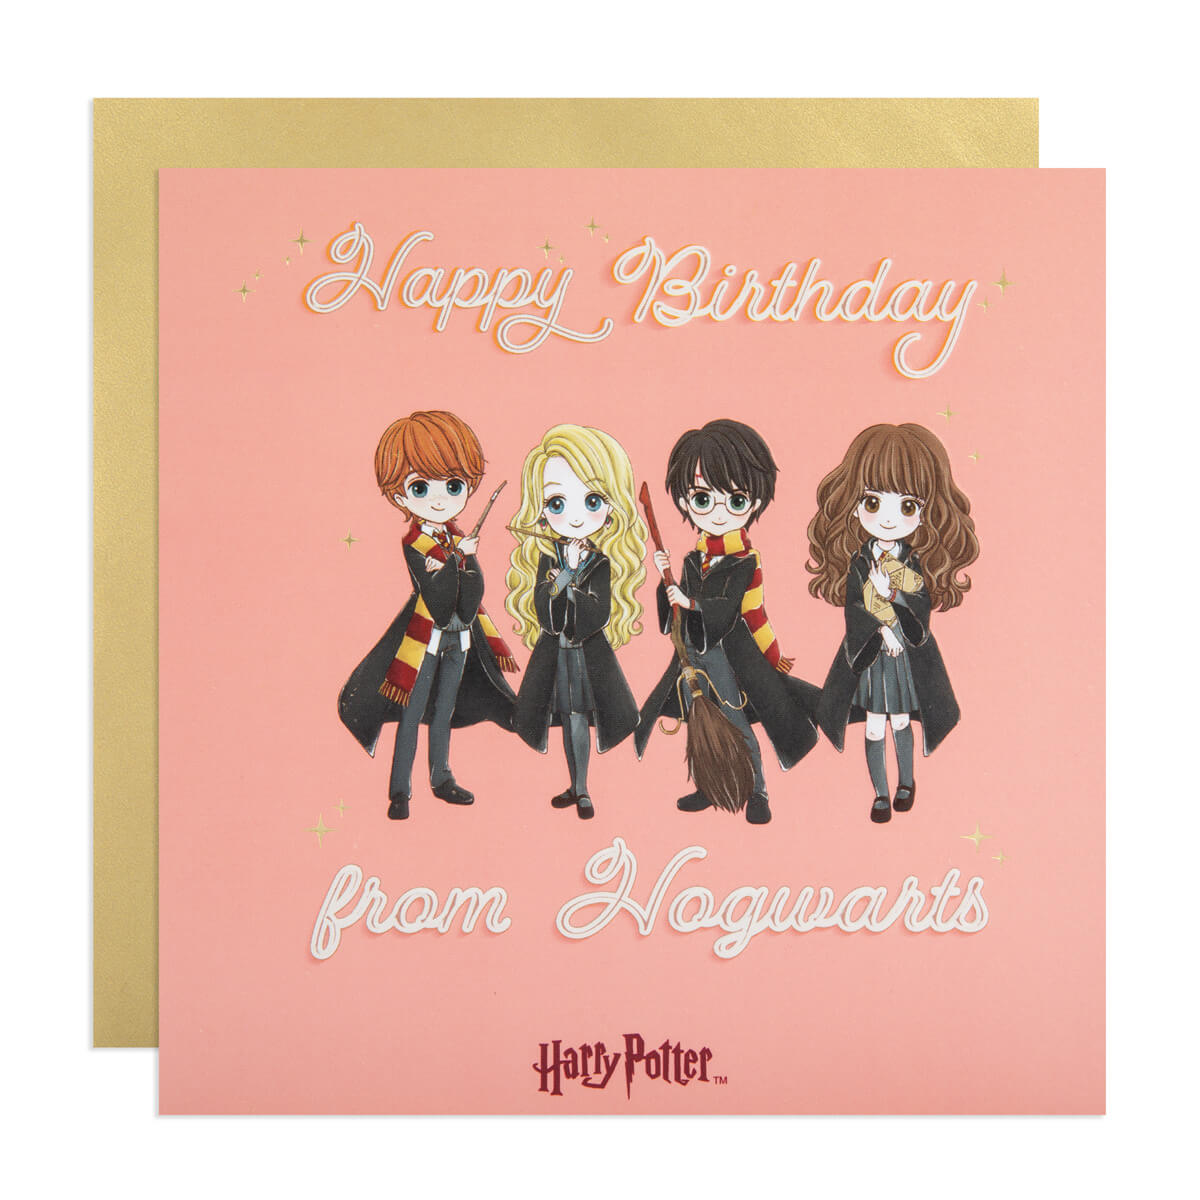 Happy Birthday From Hogwarts Card from the Anime Collection. Featuring 4 main characters drawn in an anime illustrative style, the card reads 'Happy Birthday From Hogwarts'